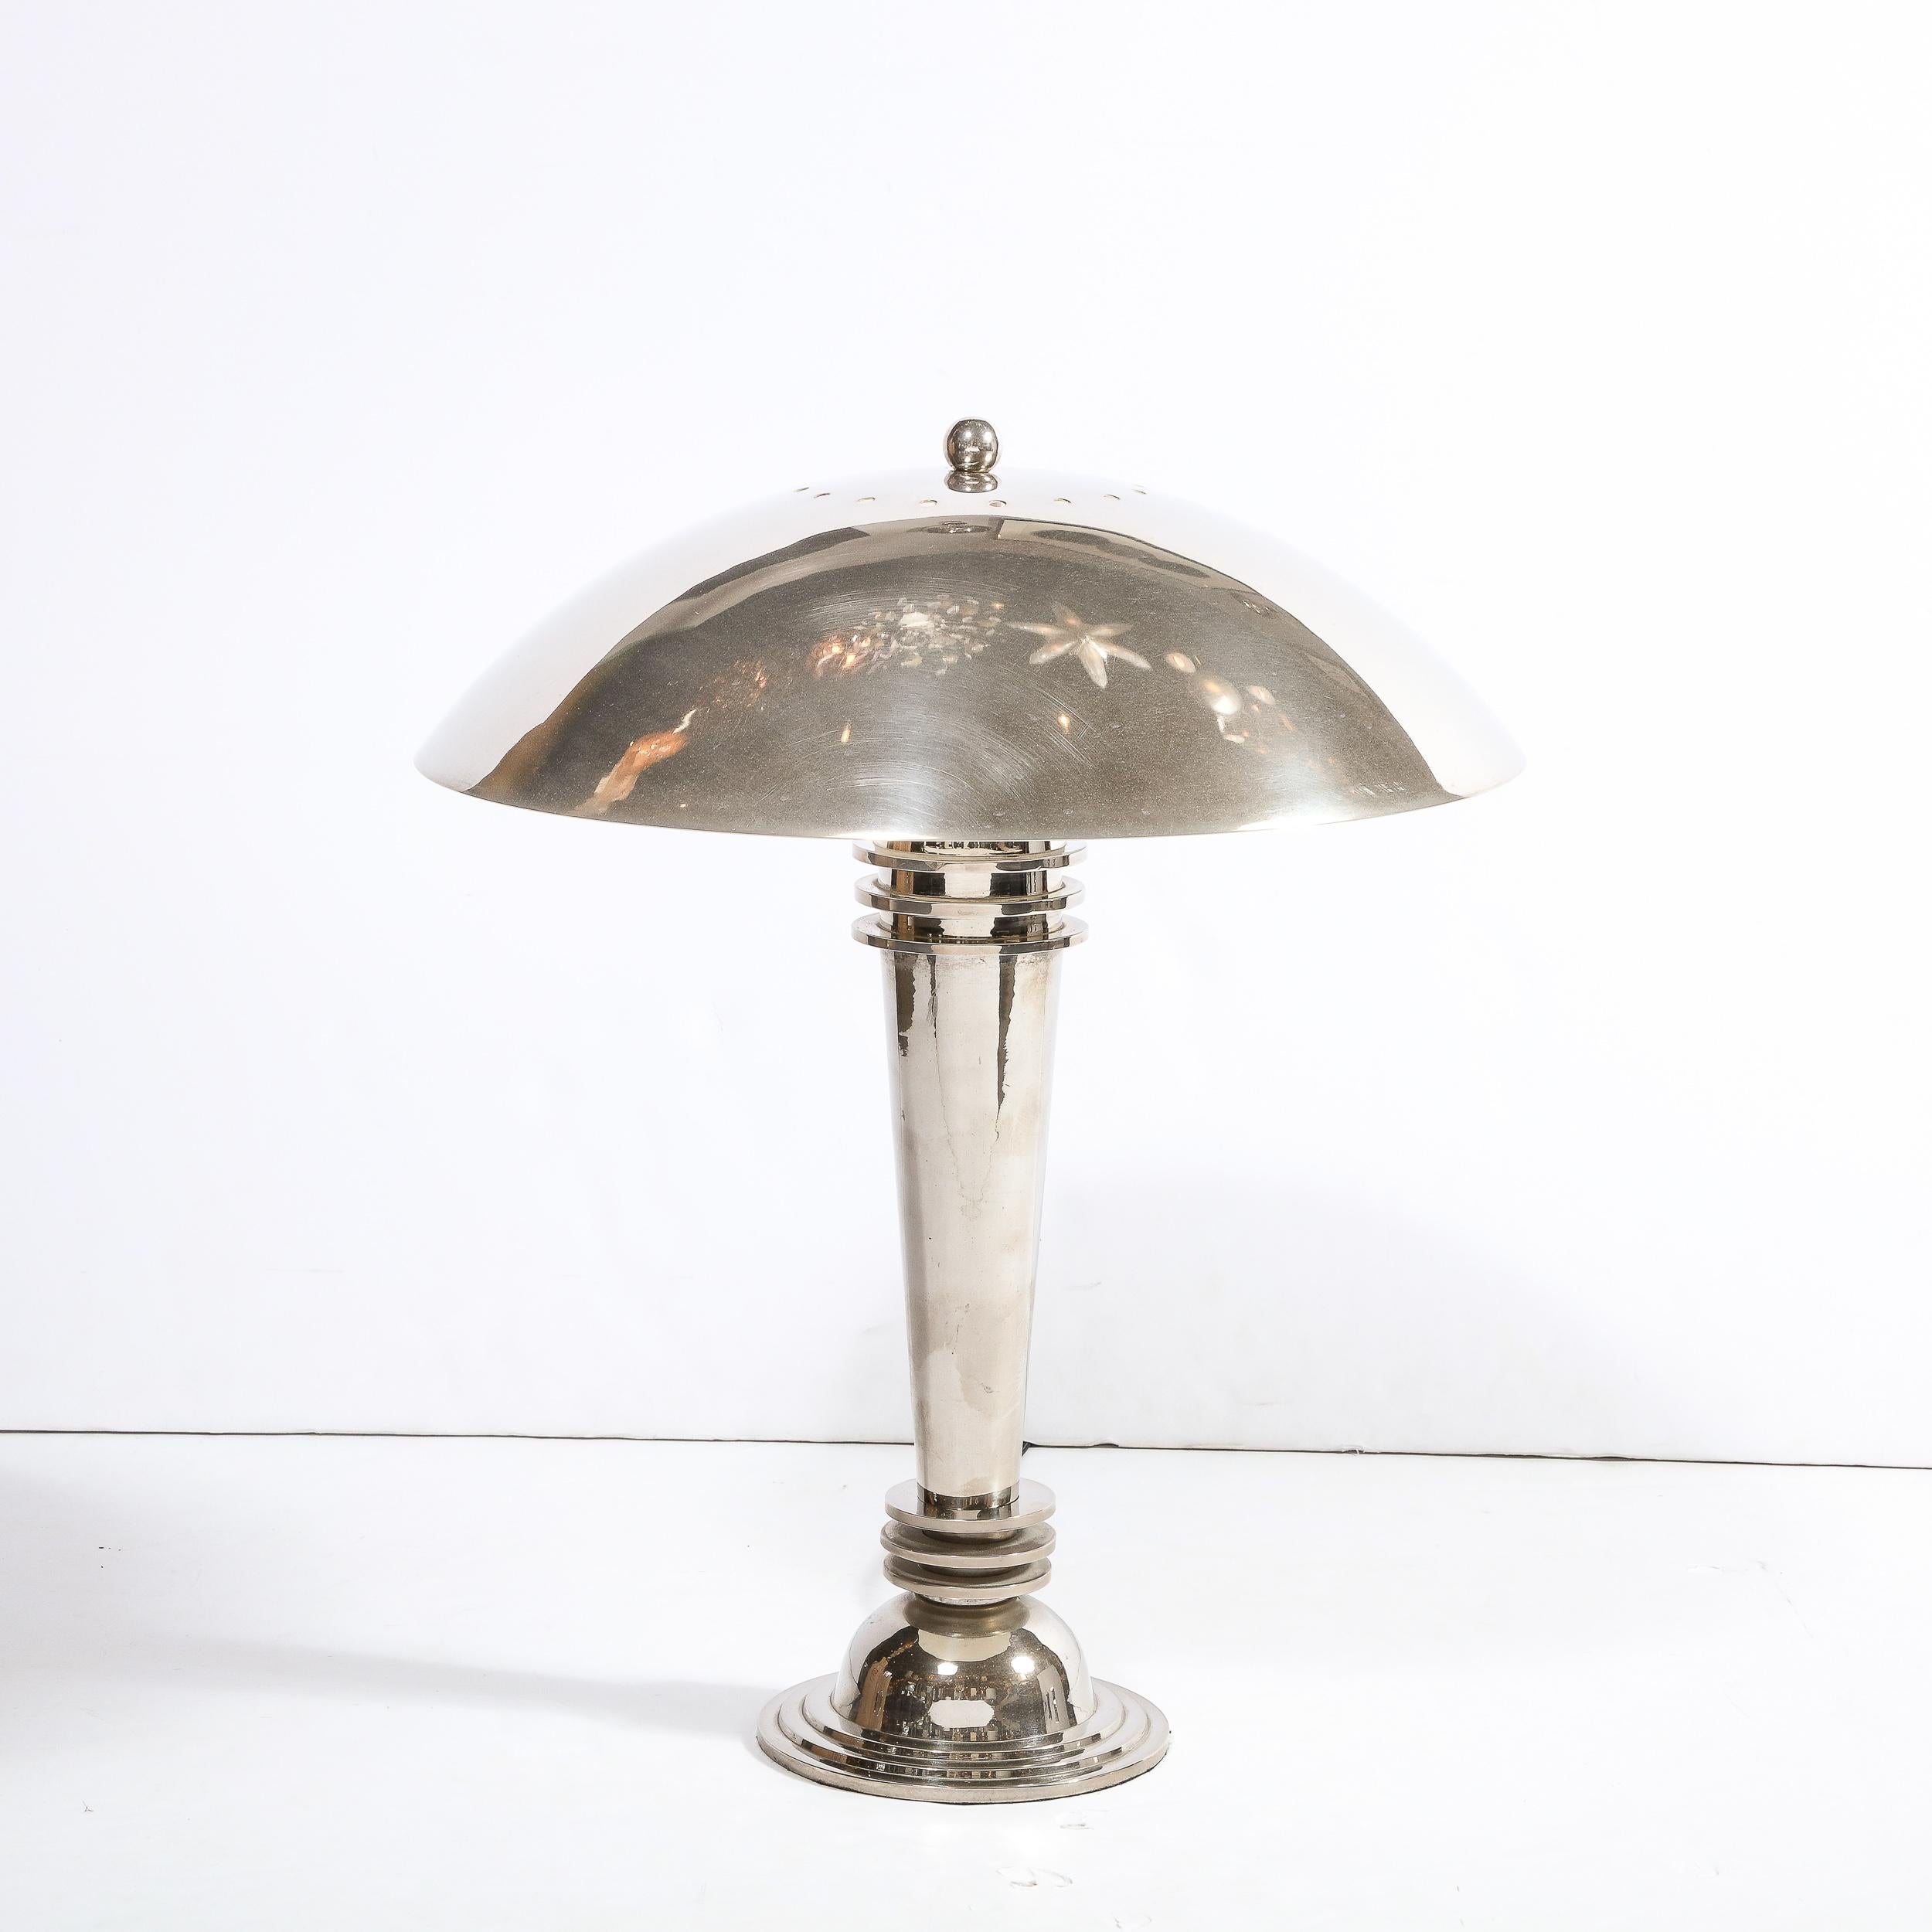 This stunning Art Deco Machine Age table lamp was realized in the United States circa 1935. It features a skyscraper style convex domed base with three concentric bands in relief in lustrous polished chrome. The elongated conical body of the lamp